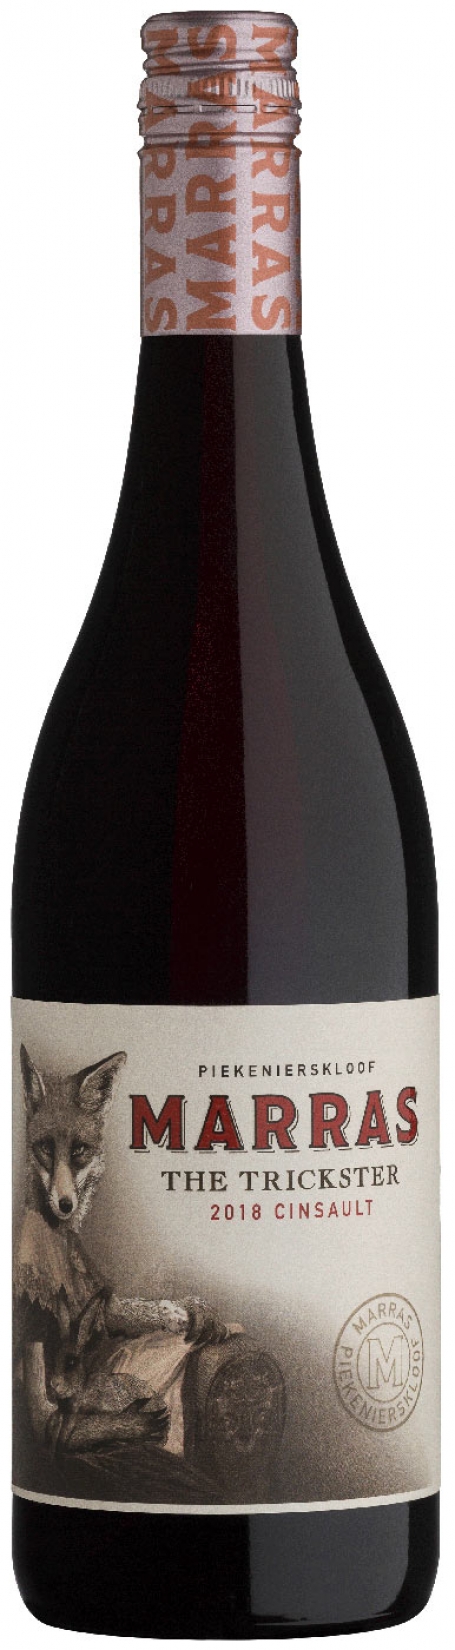 images/productimages/small/marras-cinsault.jpeg